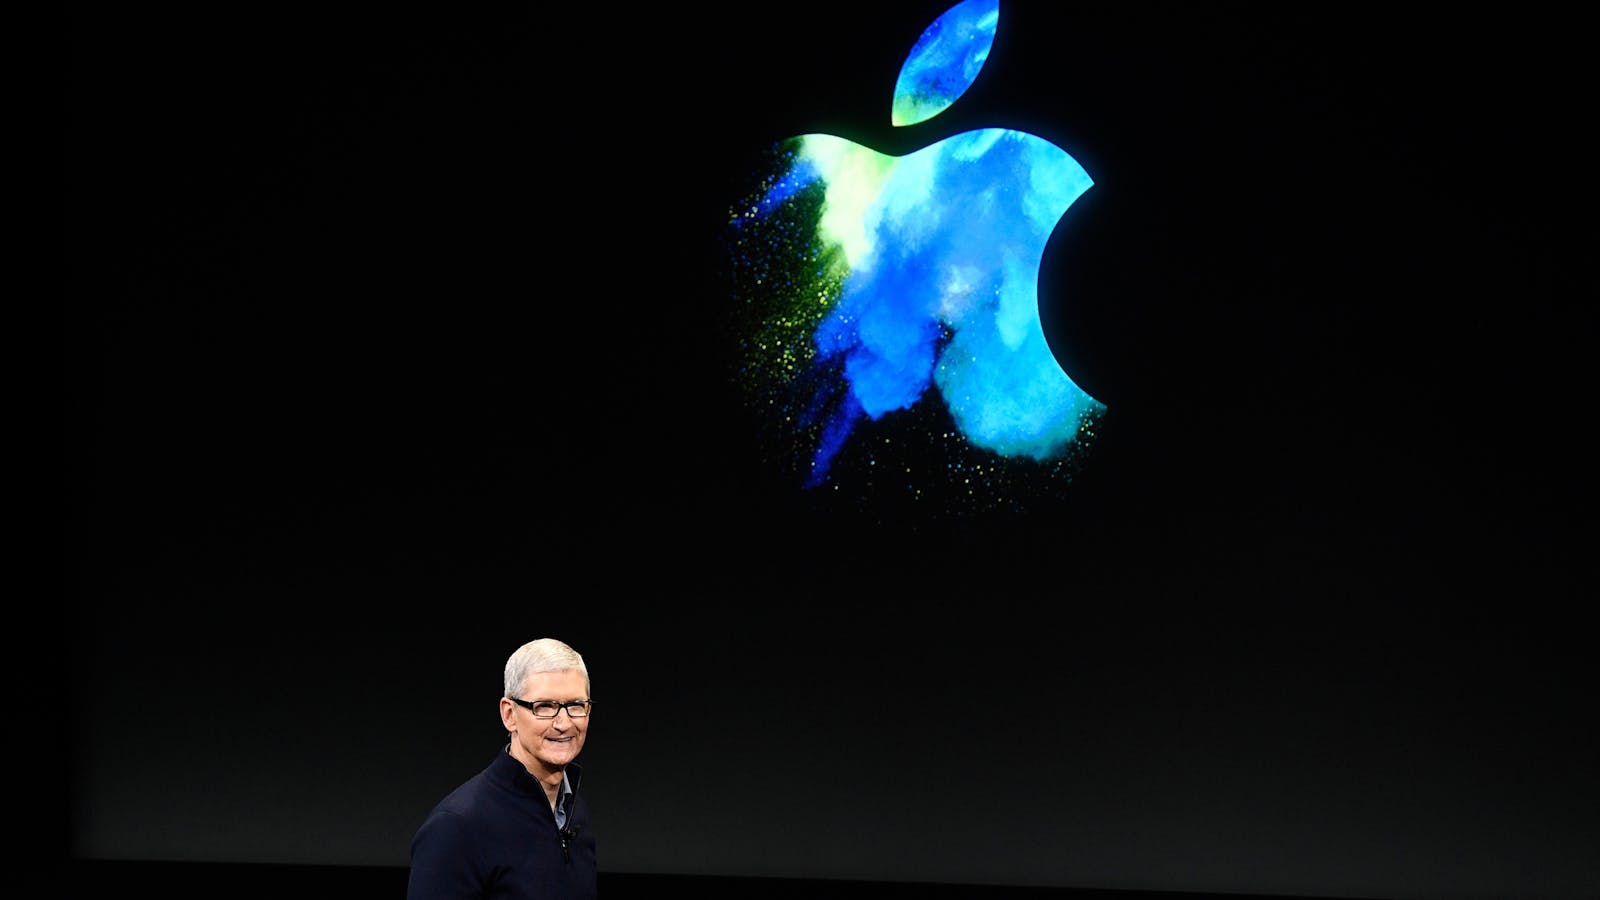 Apple CEO Tim Cook at a MacBook event on Thursday. Photo by Bloomberg.